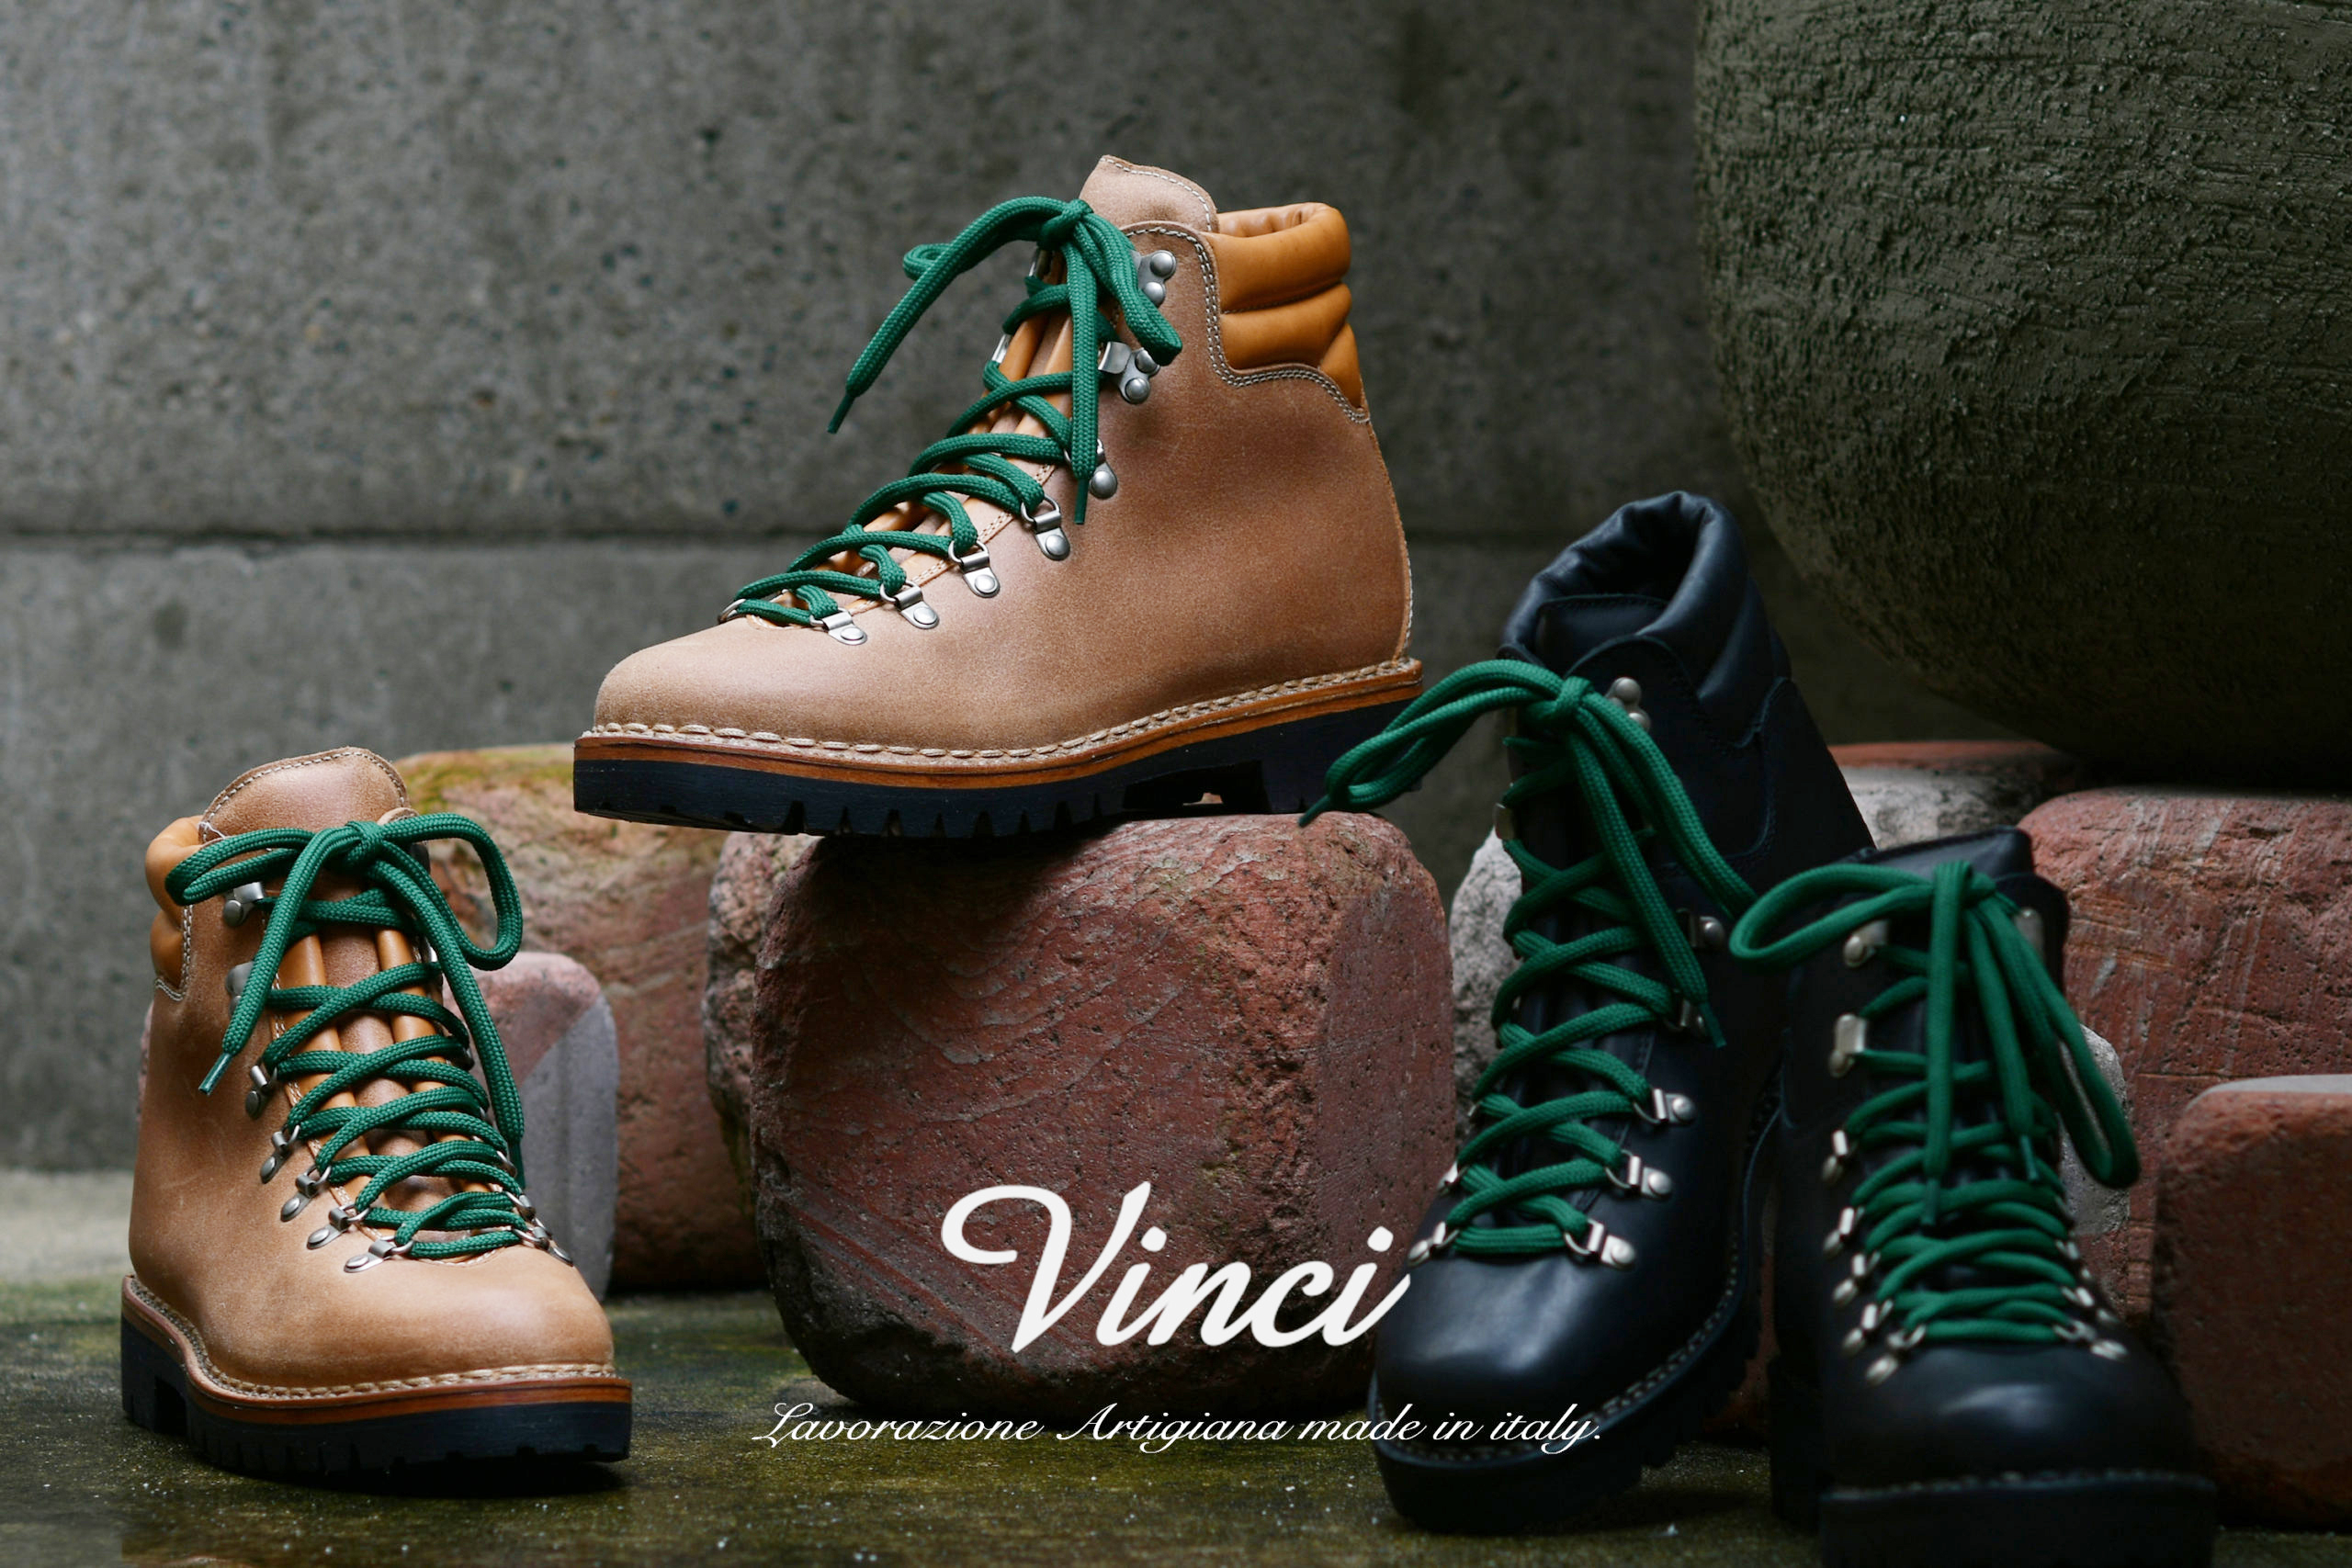 Vinci Hand Made Boots in Toscana Italy.